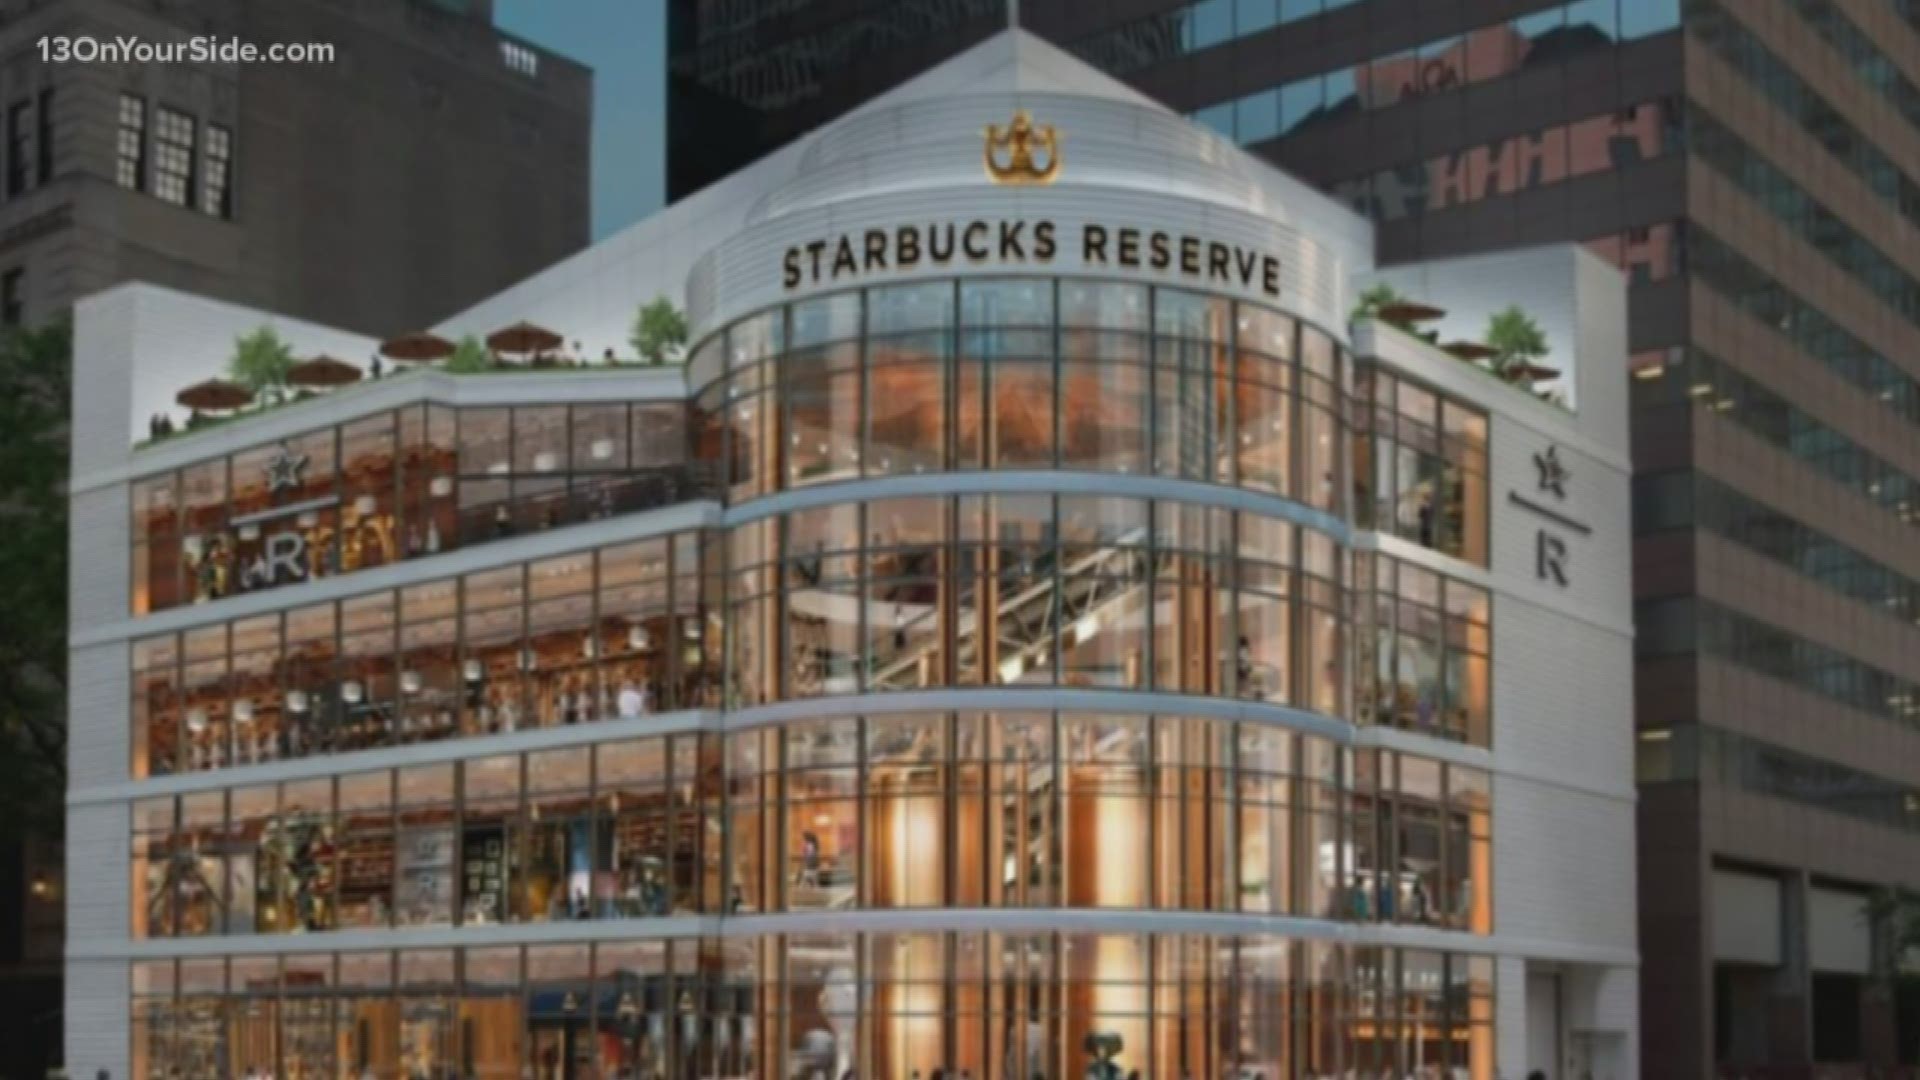 The Starbucks Reserve Roastery will be four stories tall and offer multiple brewing methods, specialty Reserve beverages and mixology.